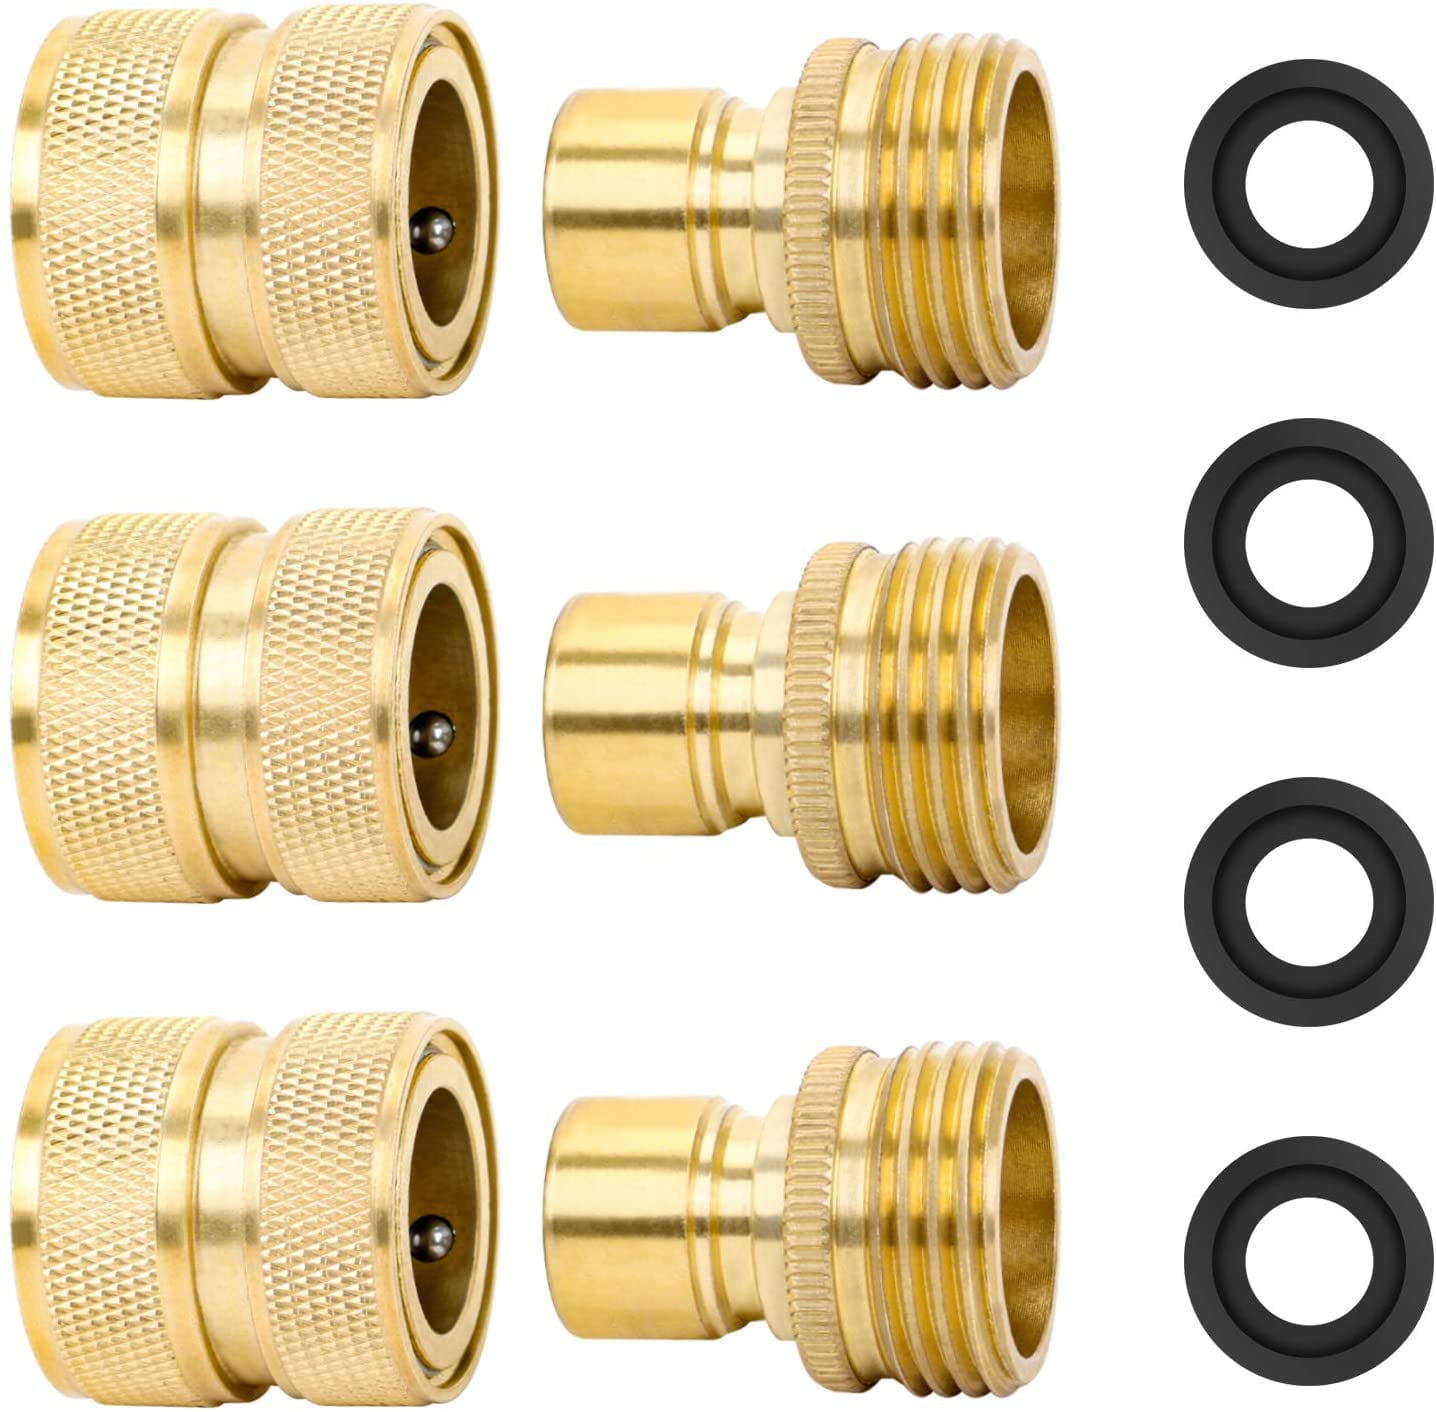 STYDDI Brass Full Flow Garden Hose Quick Release Connect Adaptor Fitting,  Full Port Solid Brass Outdoor Water Hose Quick Disconnect Connector Coupler  with Male and Female - 3 Sets 